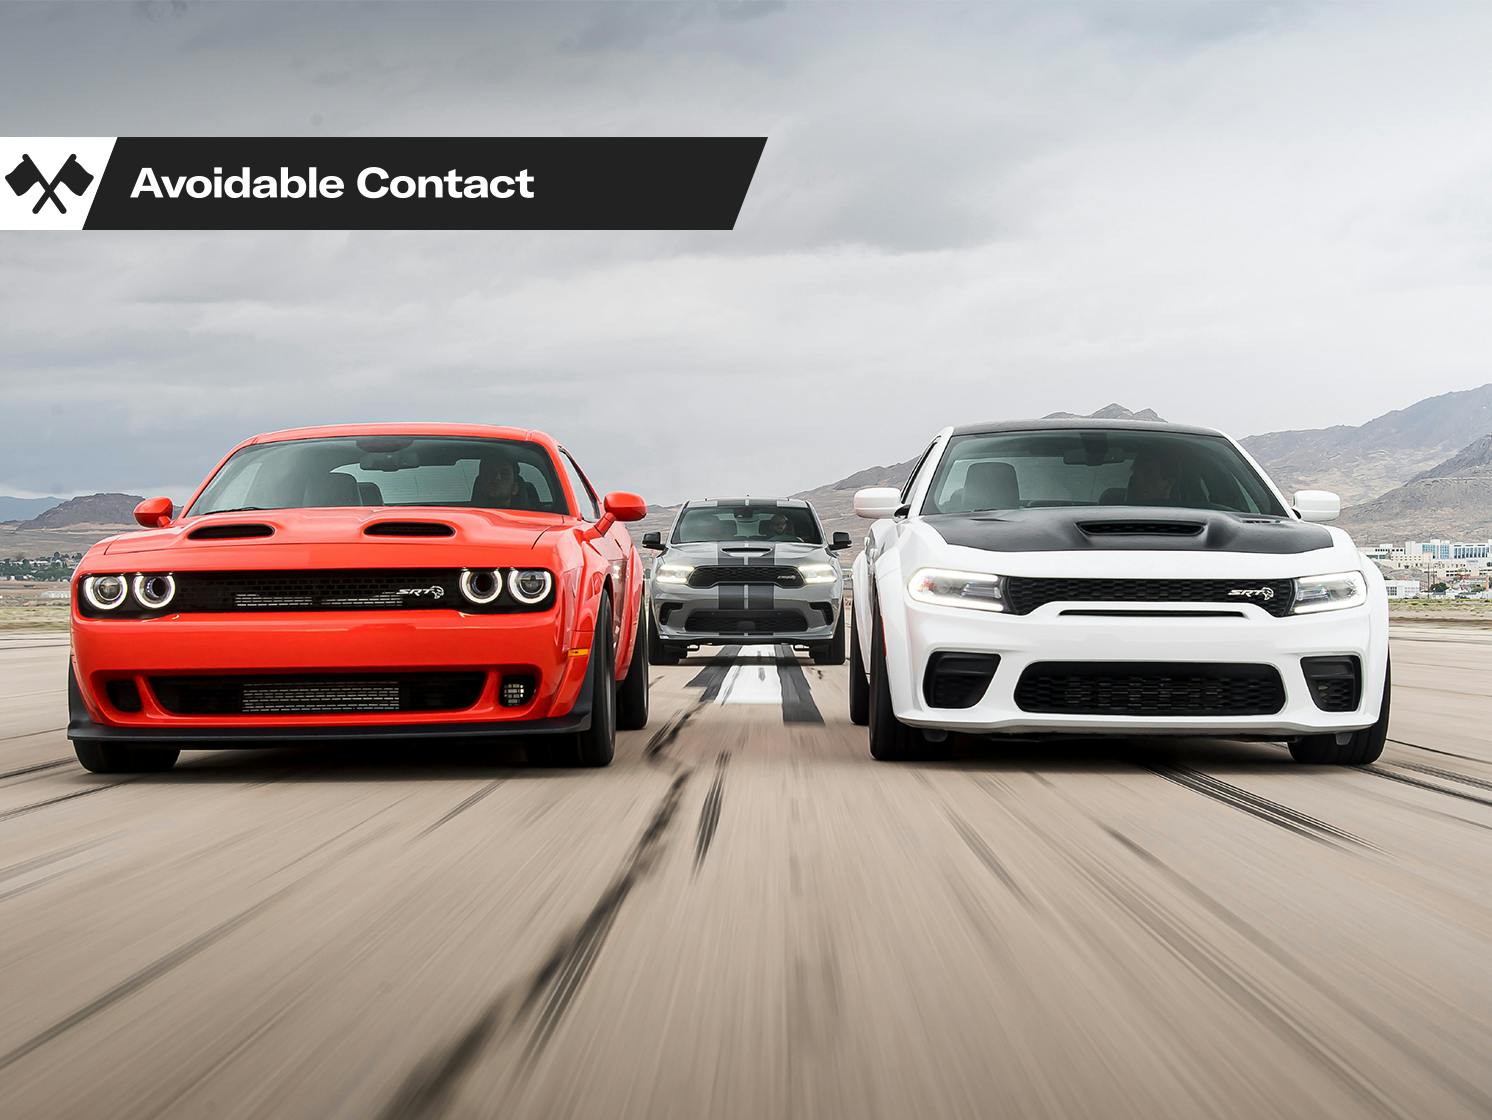 Dodge Hellcat - #Fashion rules the world baby and this